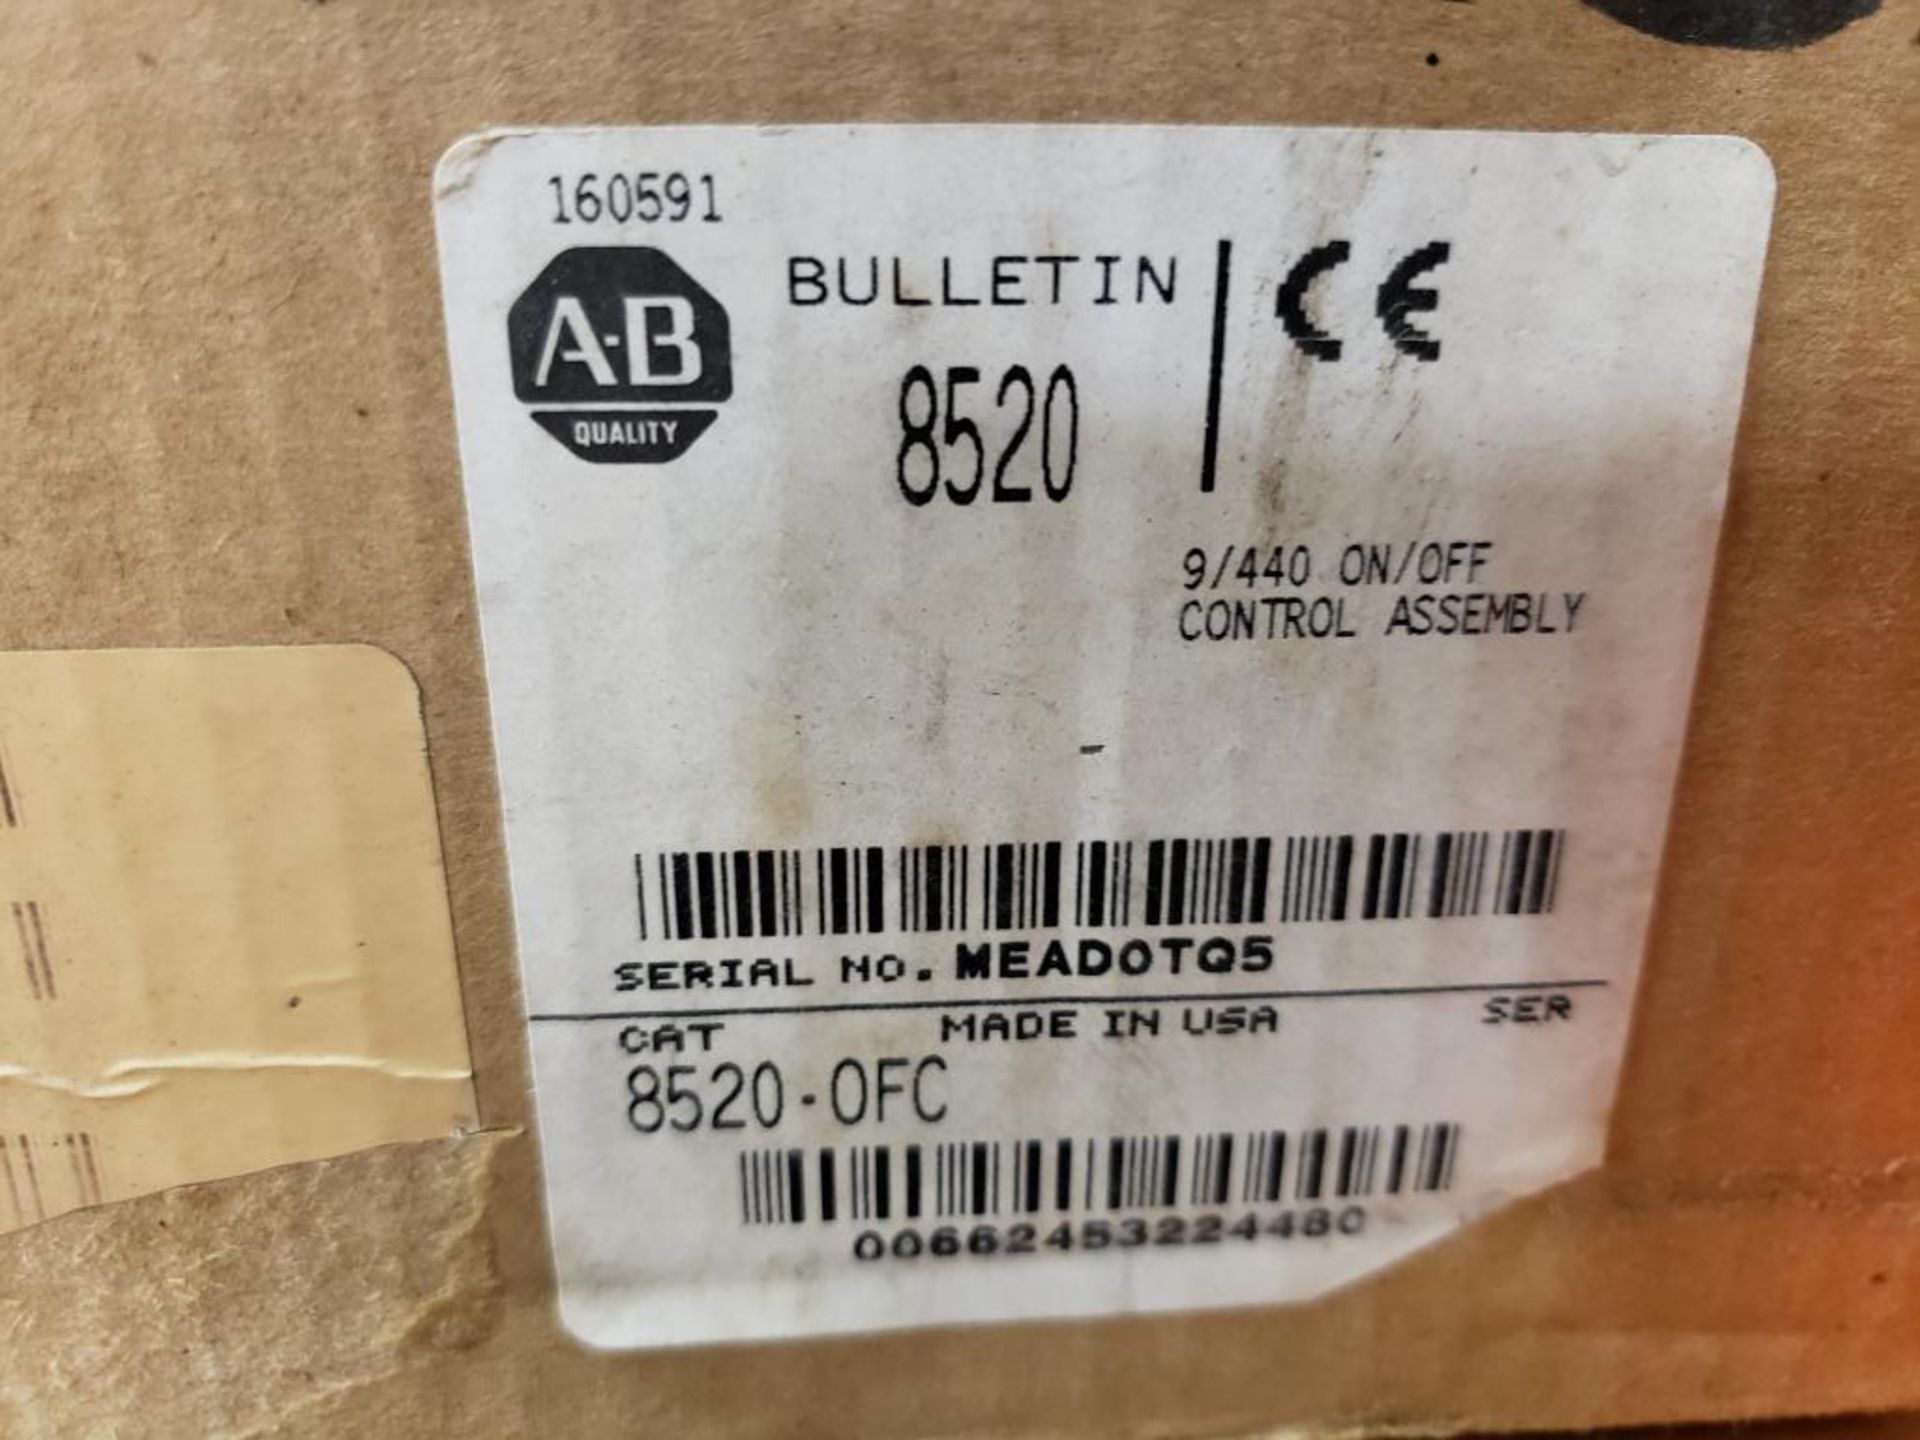 Allen Bradley 8520-OFC 9/440 On /Off control assembly. New in sealed box. - Image 2 of 3